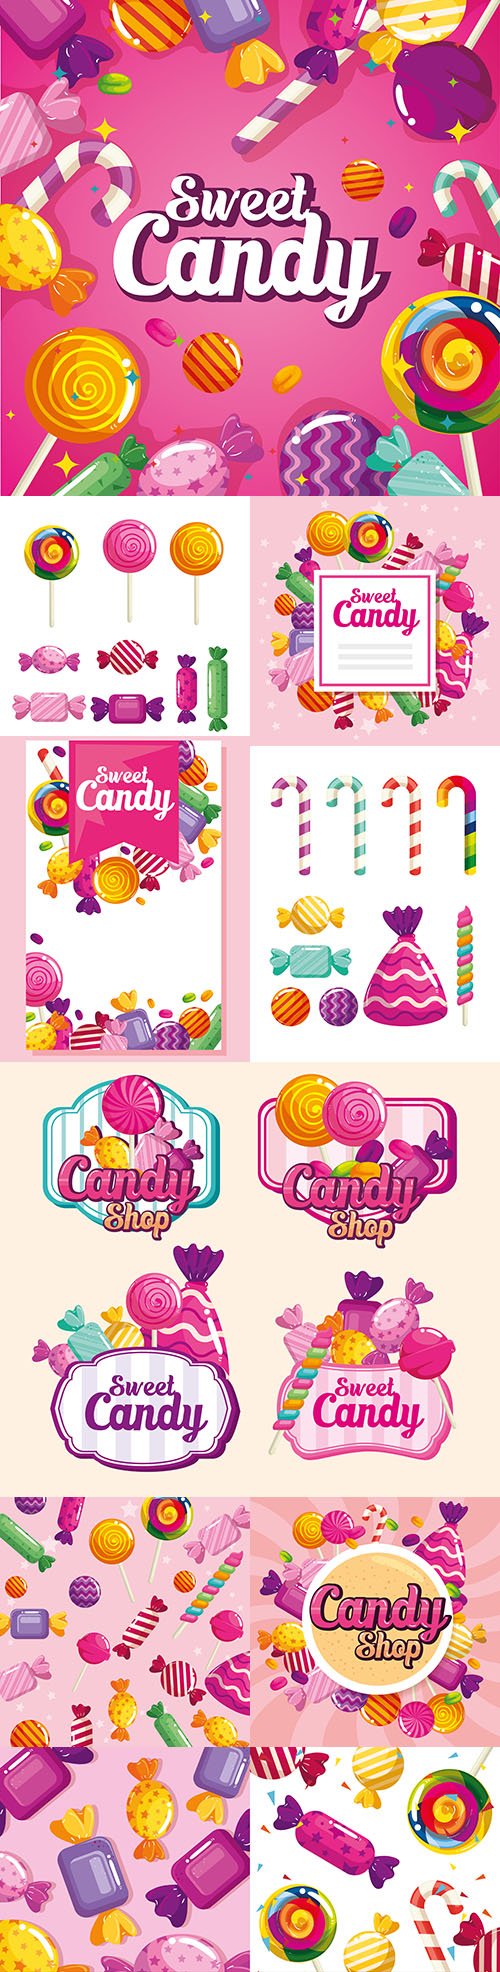 Sweet lollipop and candy delicious dessert painted illustrations